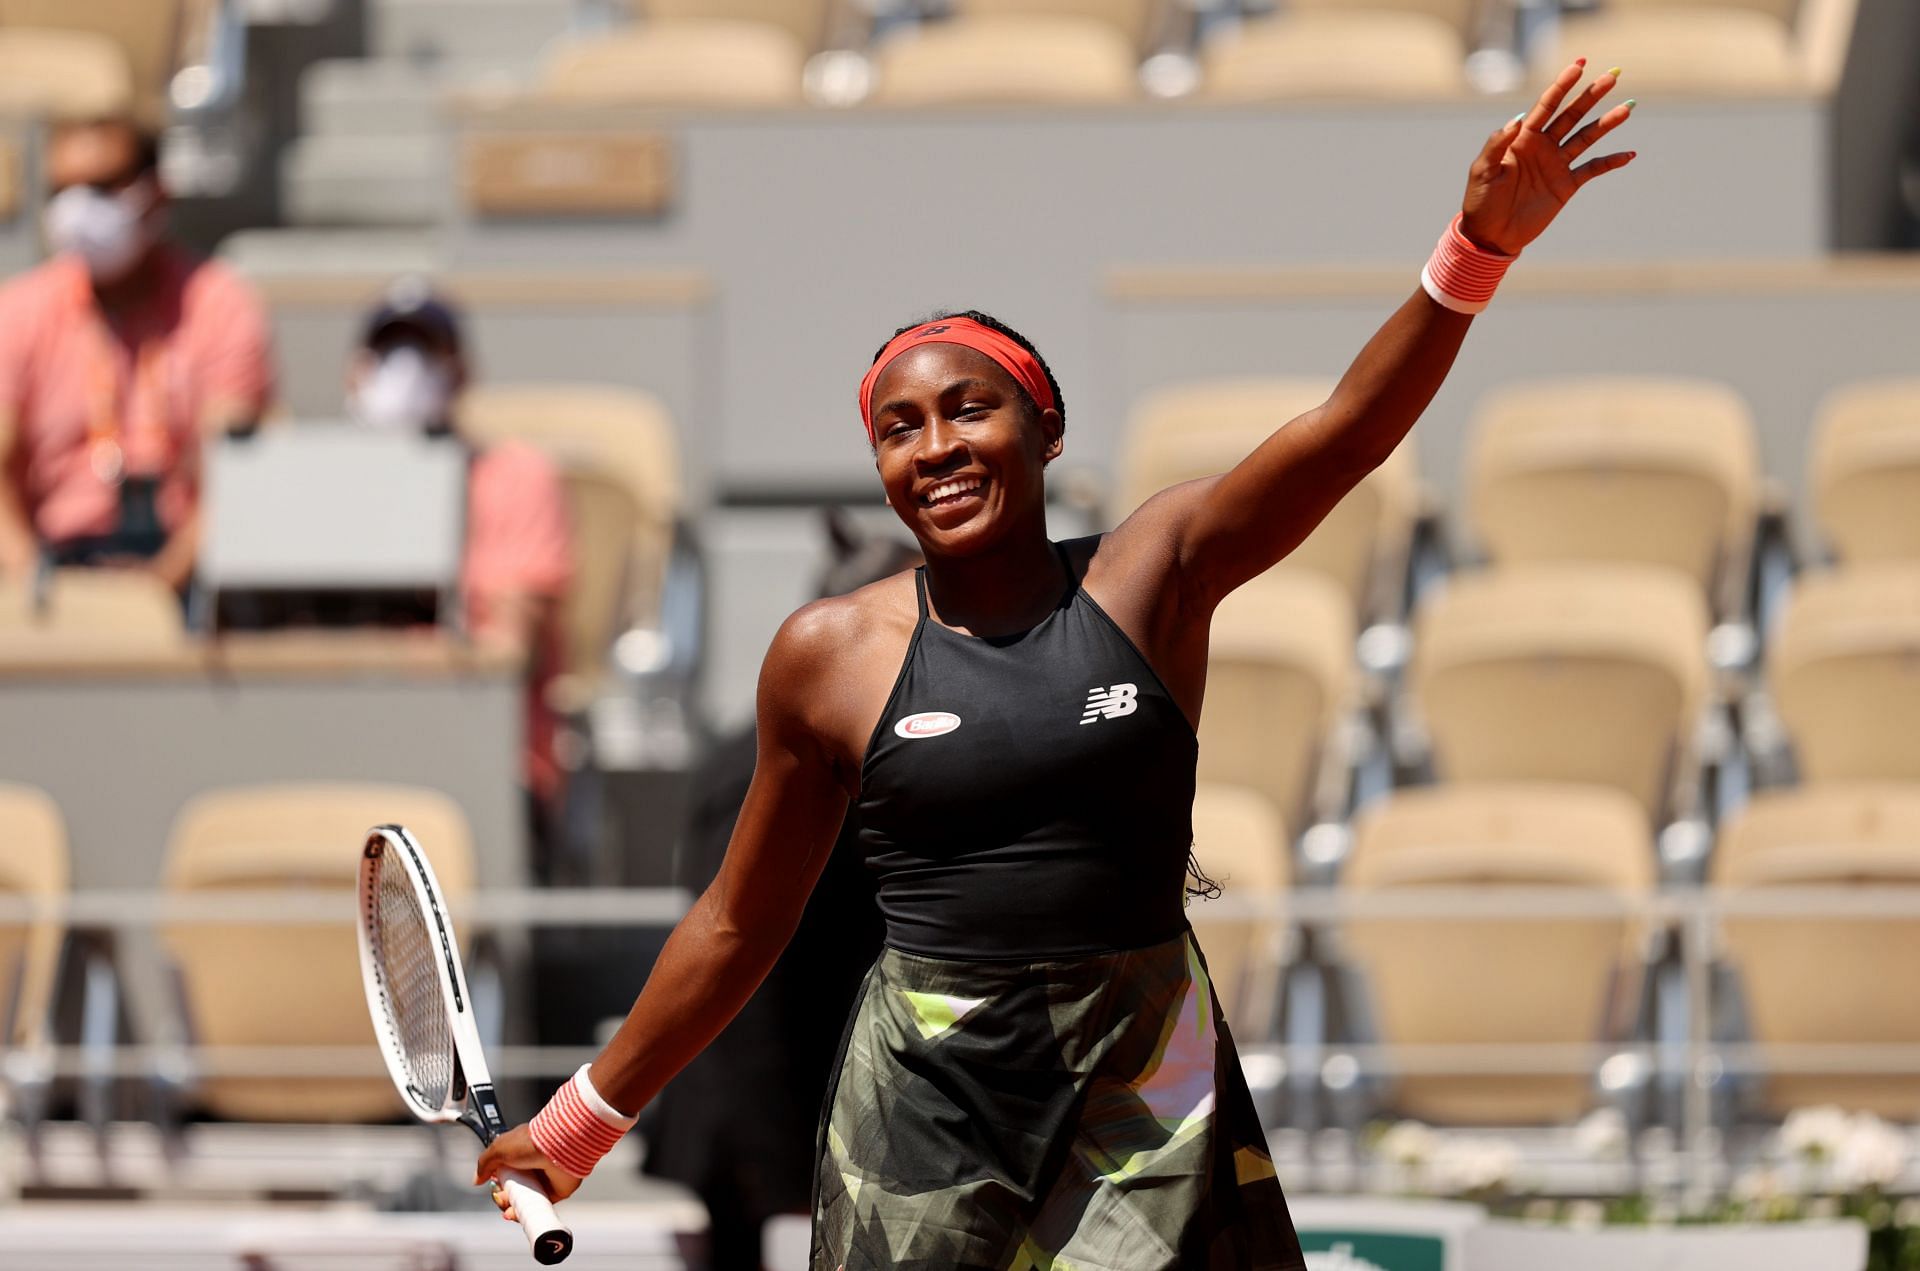 Coco Gauff takes on Wang Xinyu in the second round of the Bett1open